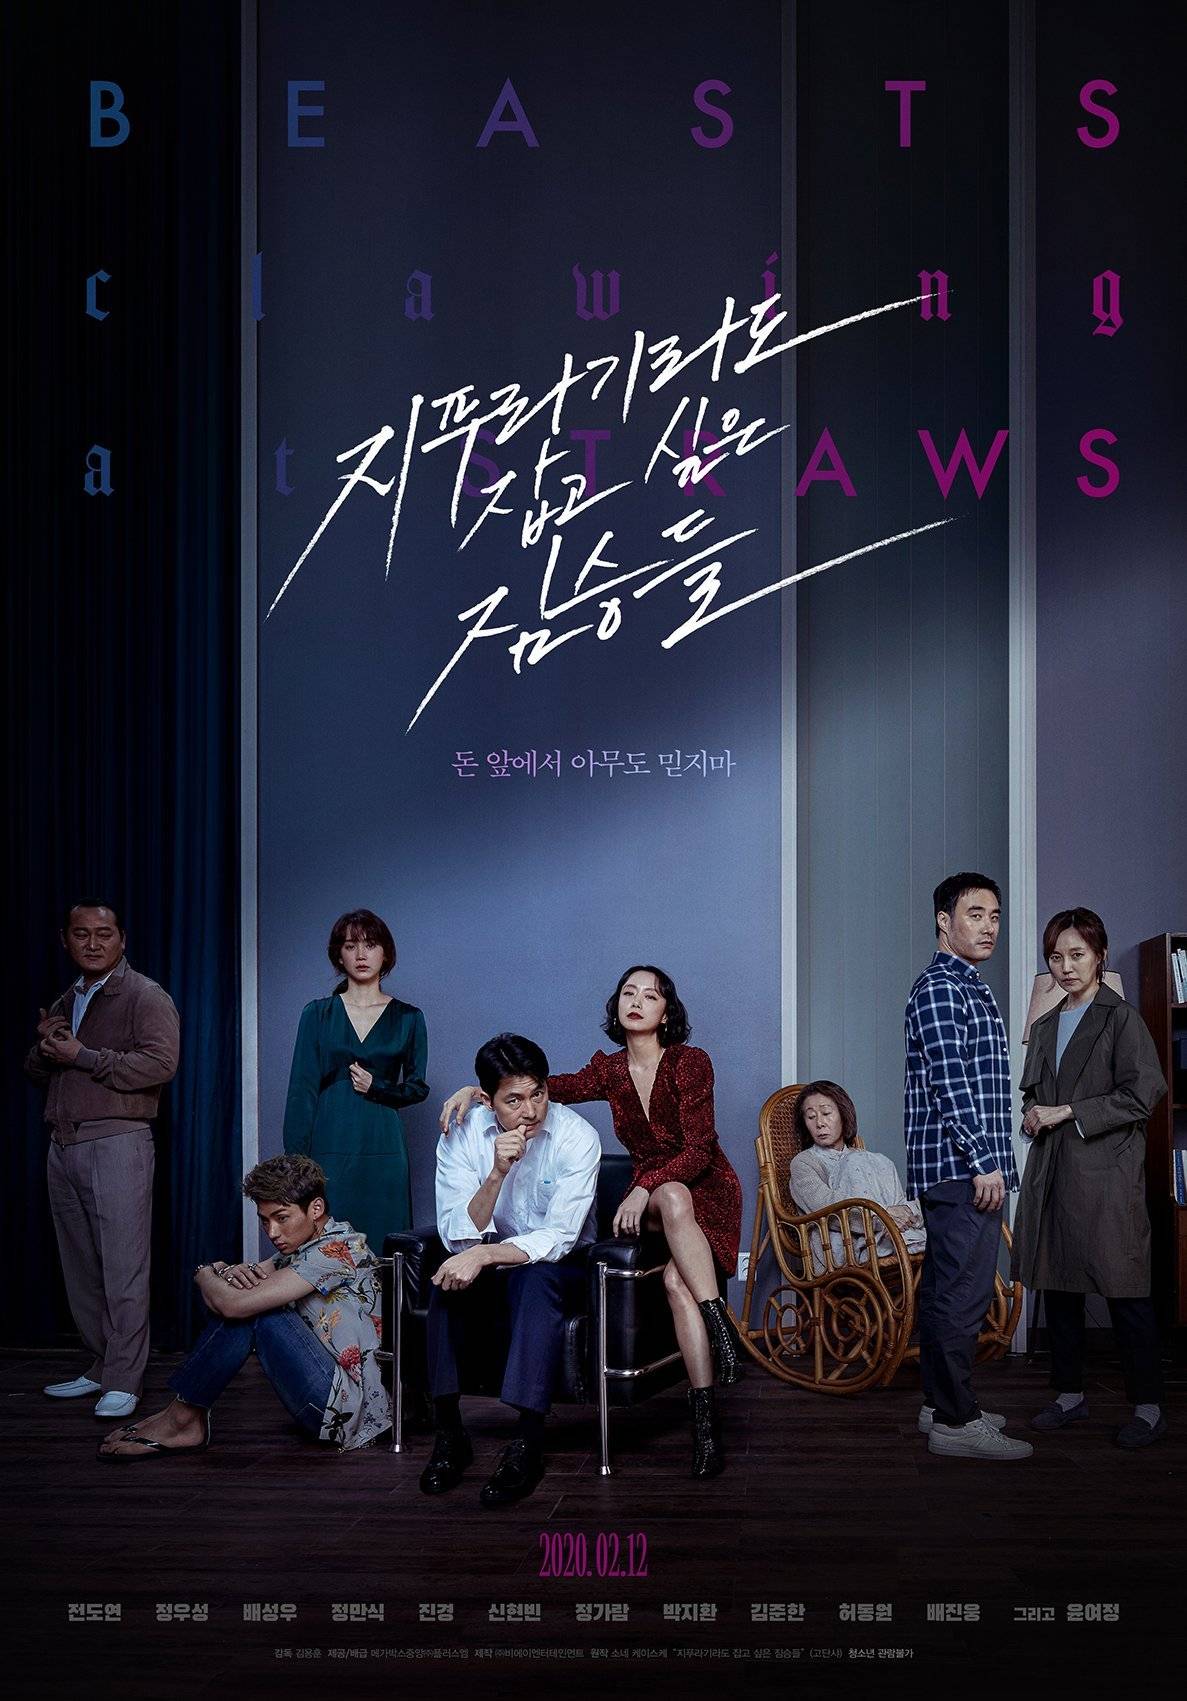 HanCinema's News] Main Poster Released for "Beasts Clawing at ...